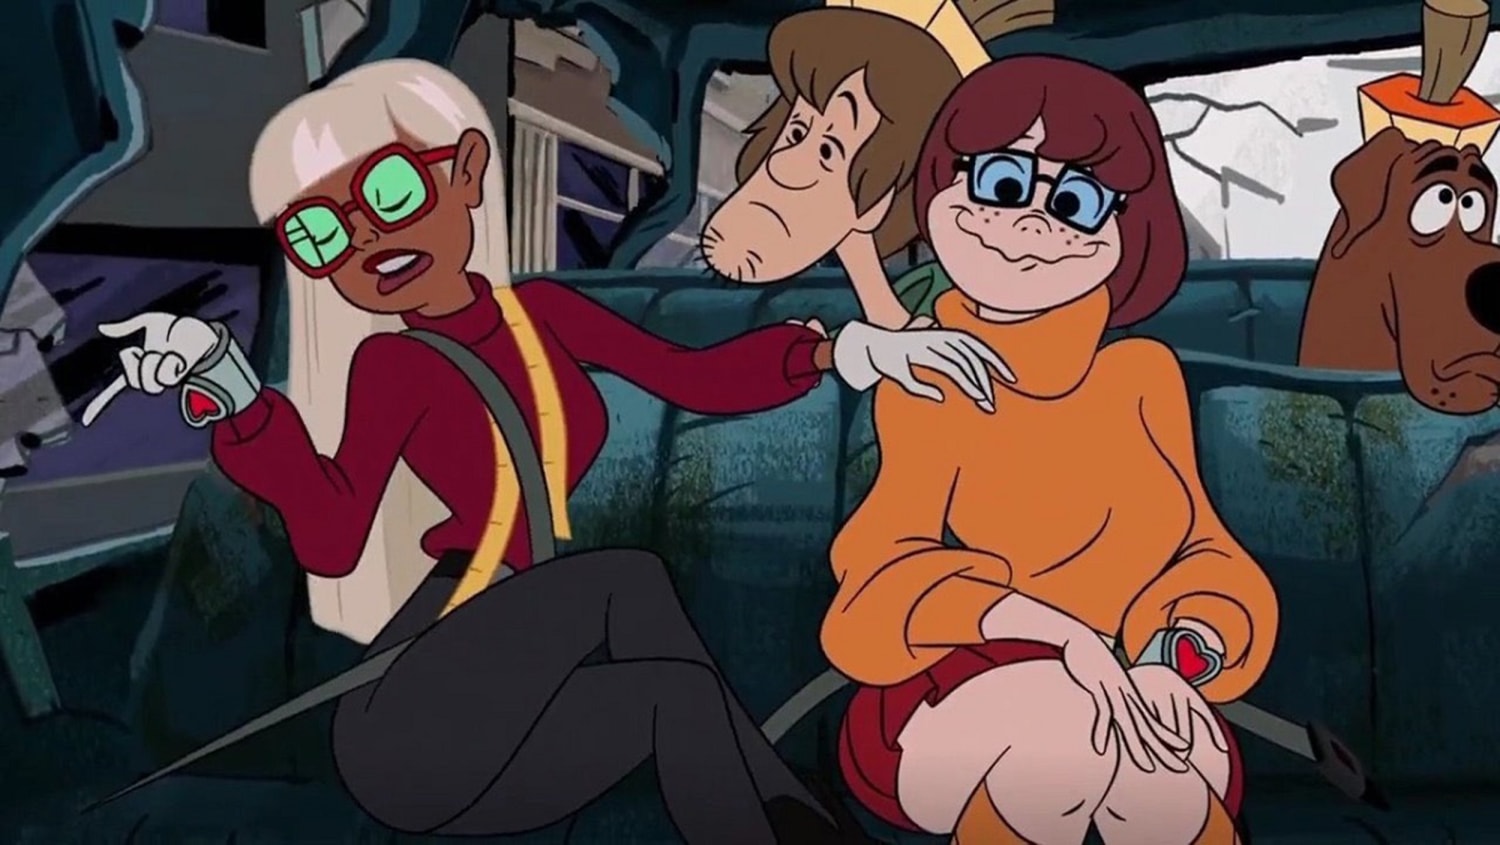 Scooby-Doo's 'Velma' Becomes Worst Rated Animation In History After Showing  Lesbian Scene & Joking About Sexualizing Teens, Radio/TV